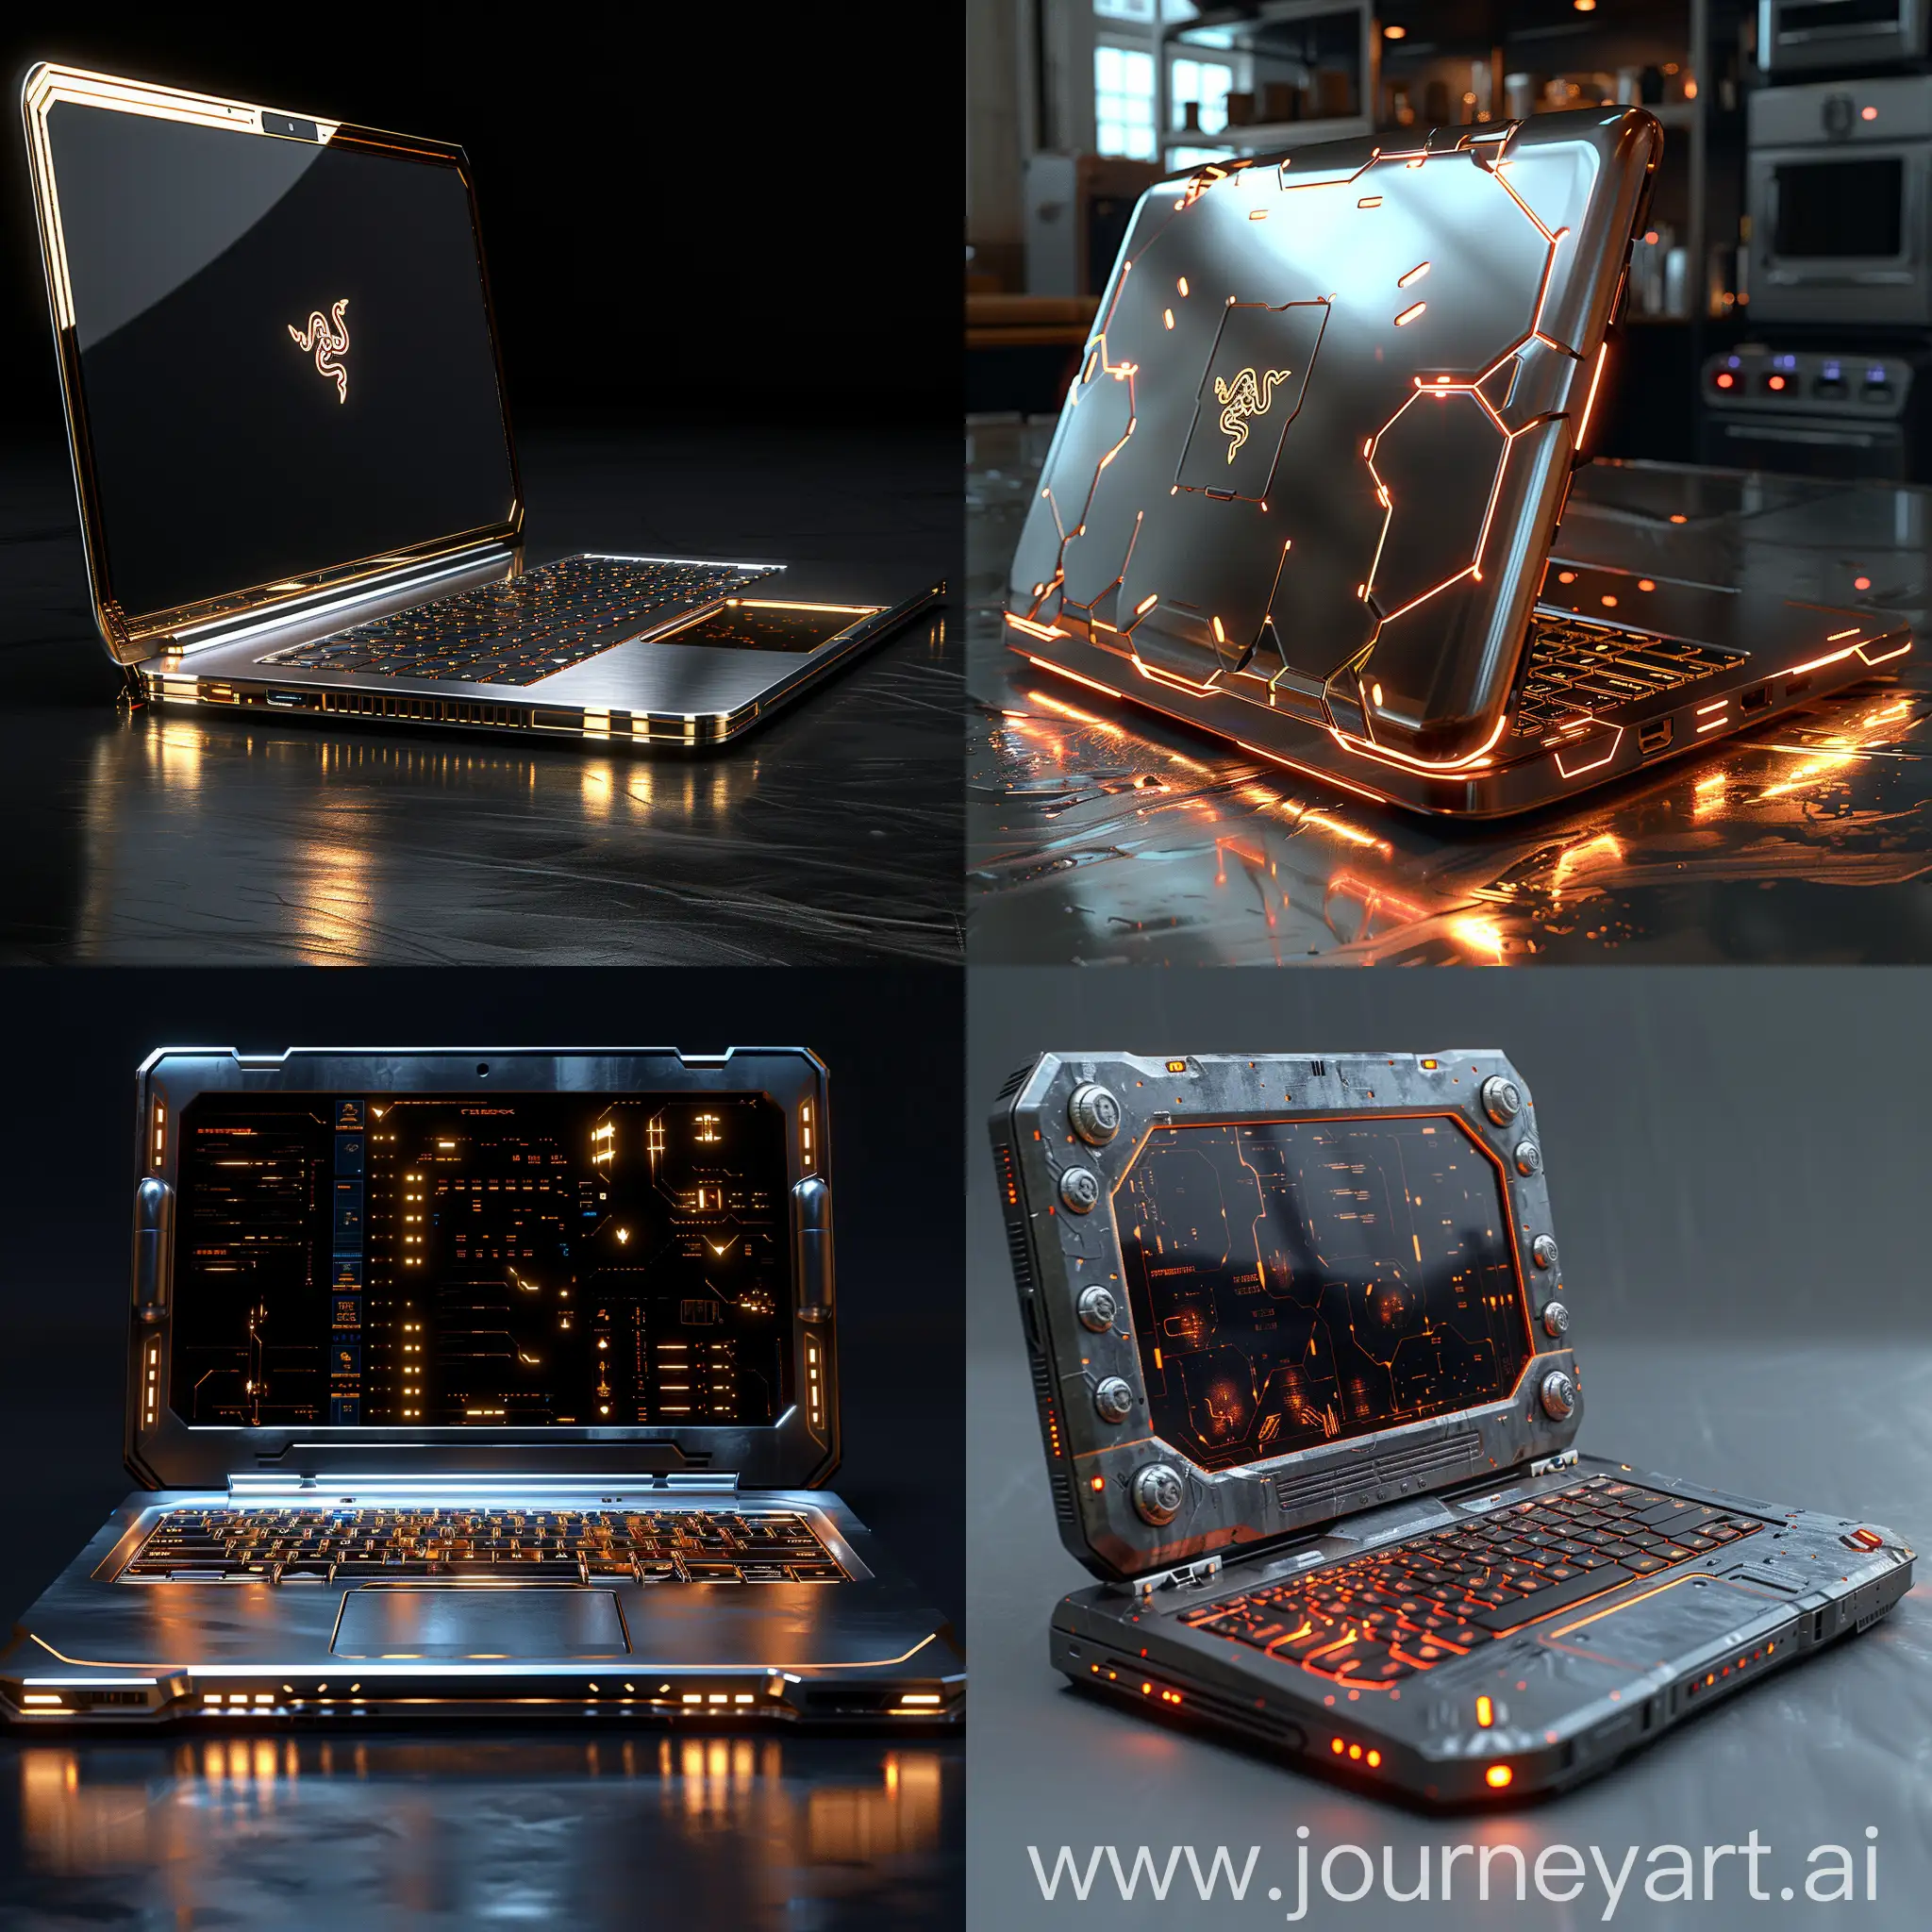 Futuristic-Stainless-Steel-Laptop-with-Reinforced-Materials-and-High-Tech-Features